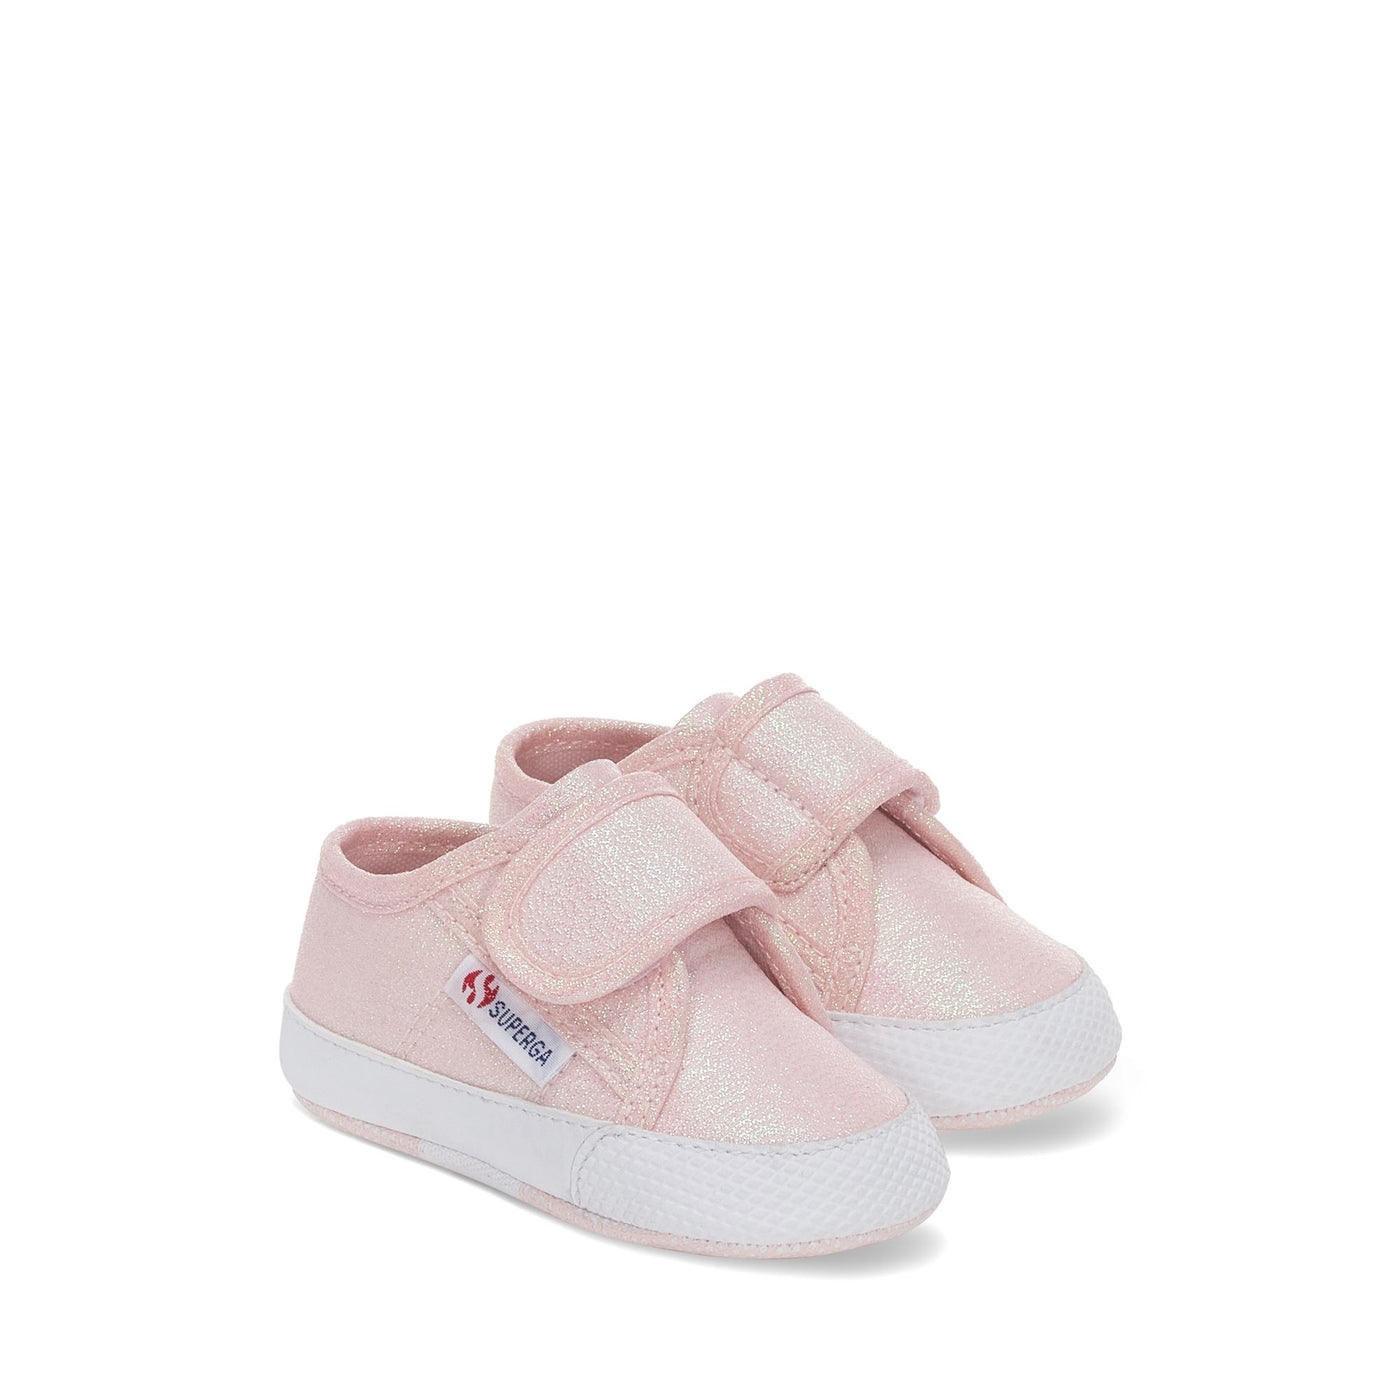 Sneakers Girl 4006 BABY STRAP LAME Low Cut PINK ISH IRIDESCENT Dressed Front (jpg Rgb)	